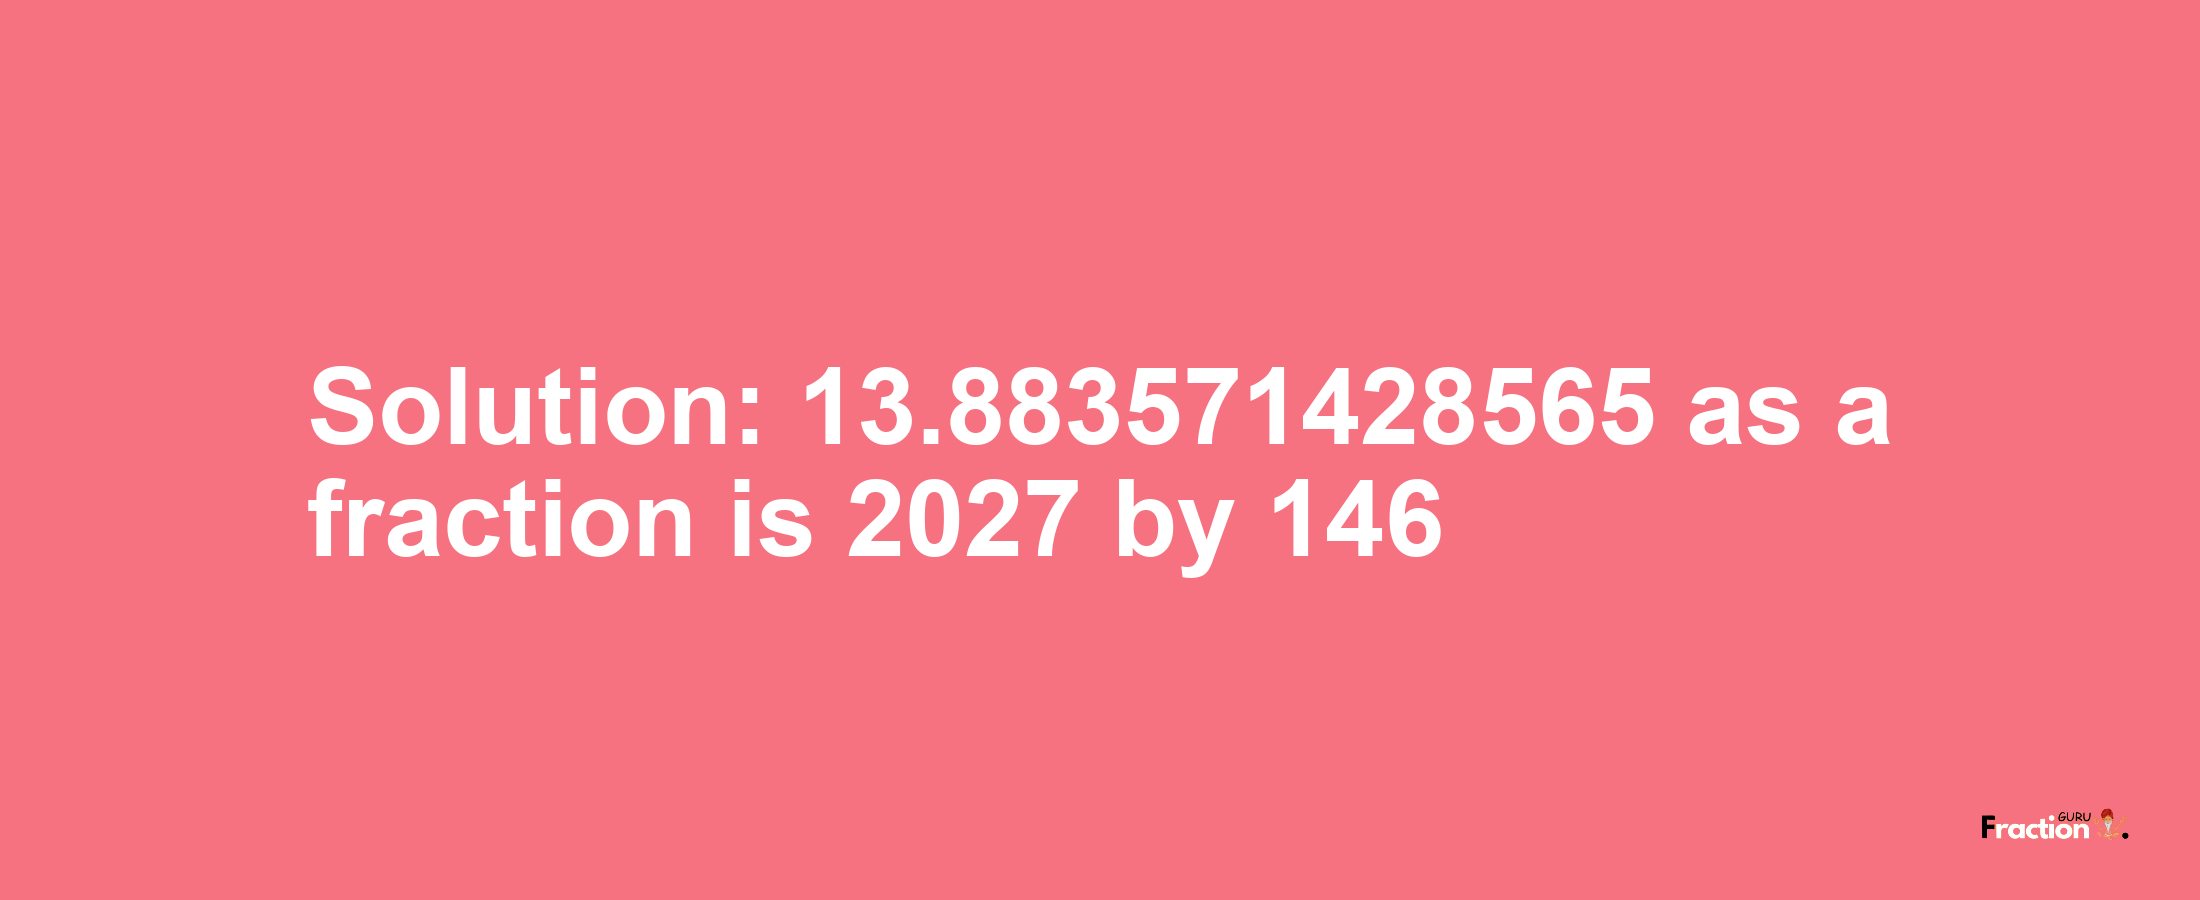 Solution:13.883571428565 as a fraction is 2027/146